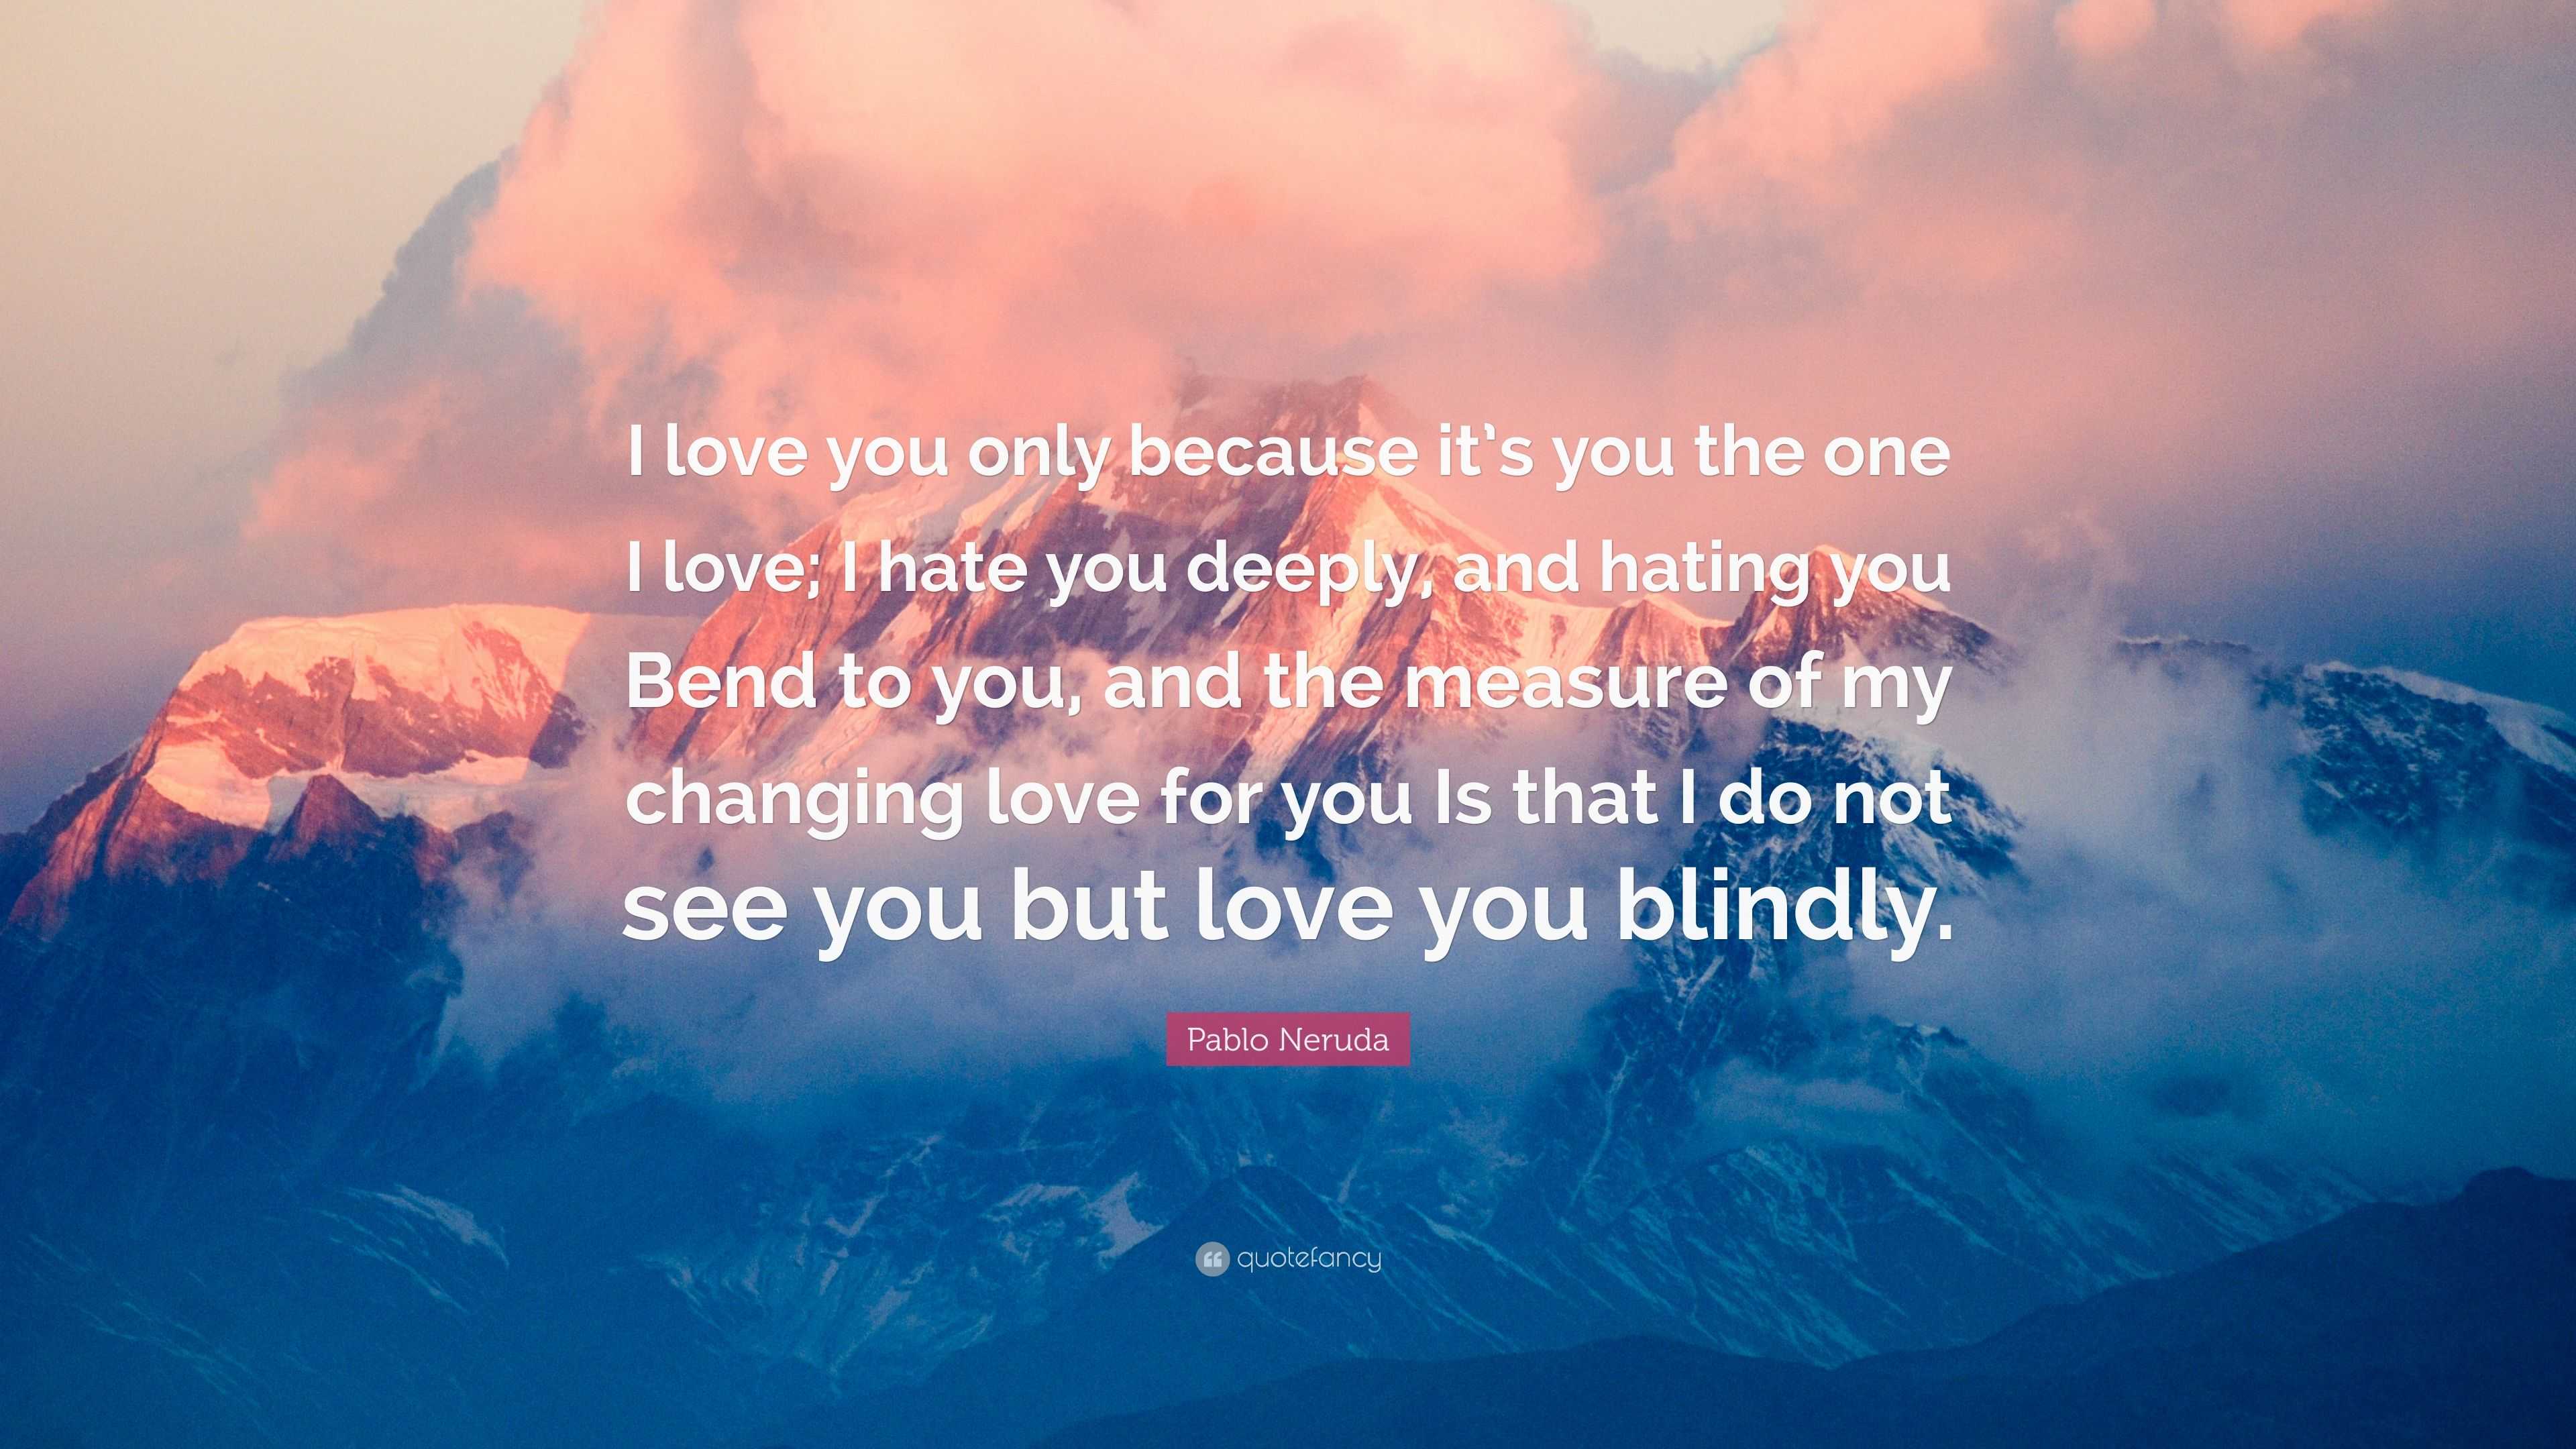 Pablo Neruda Quote: “I love you only because it’s you the one I love; I ...